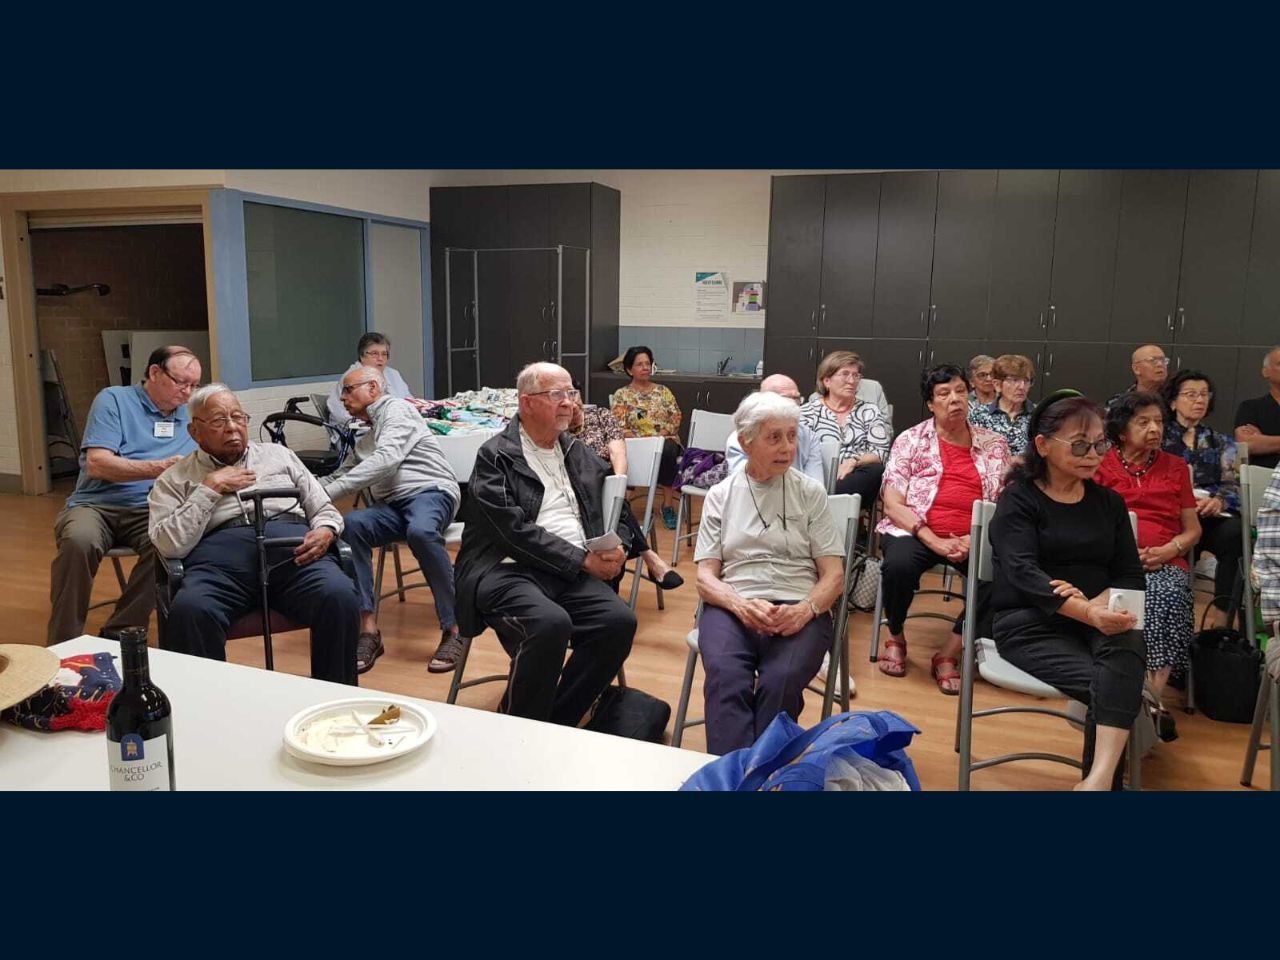 Part of the Perth Meeting audience watching PeterSnow's presentation